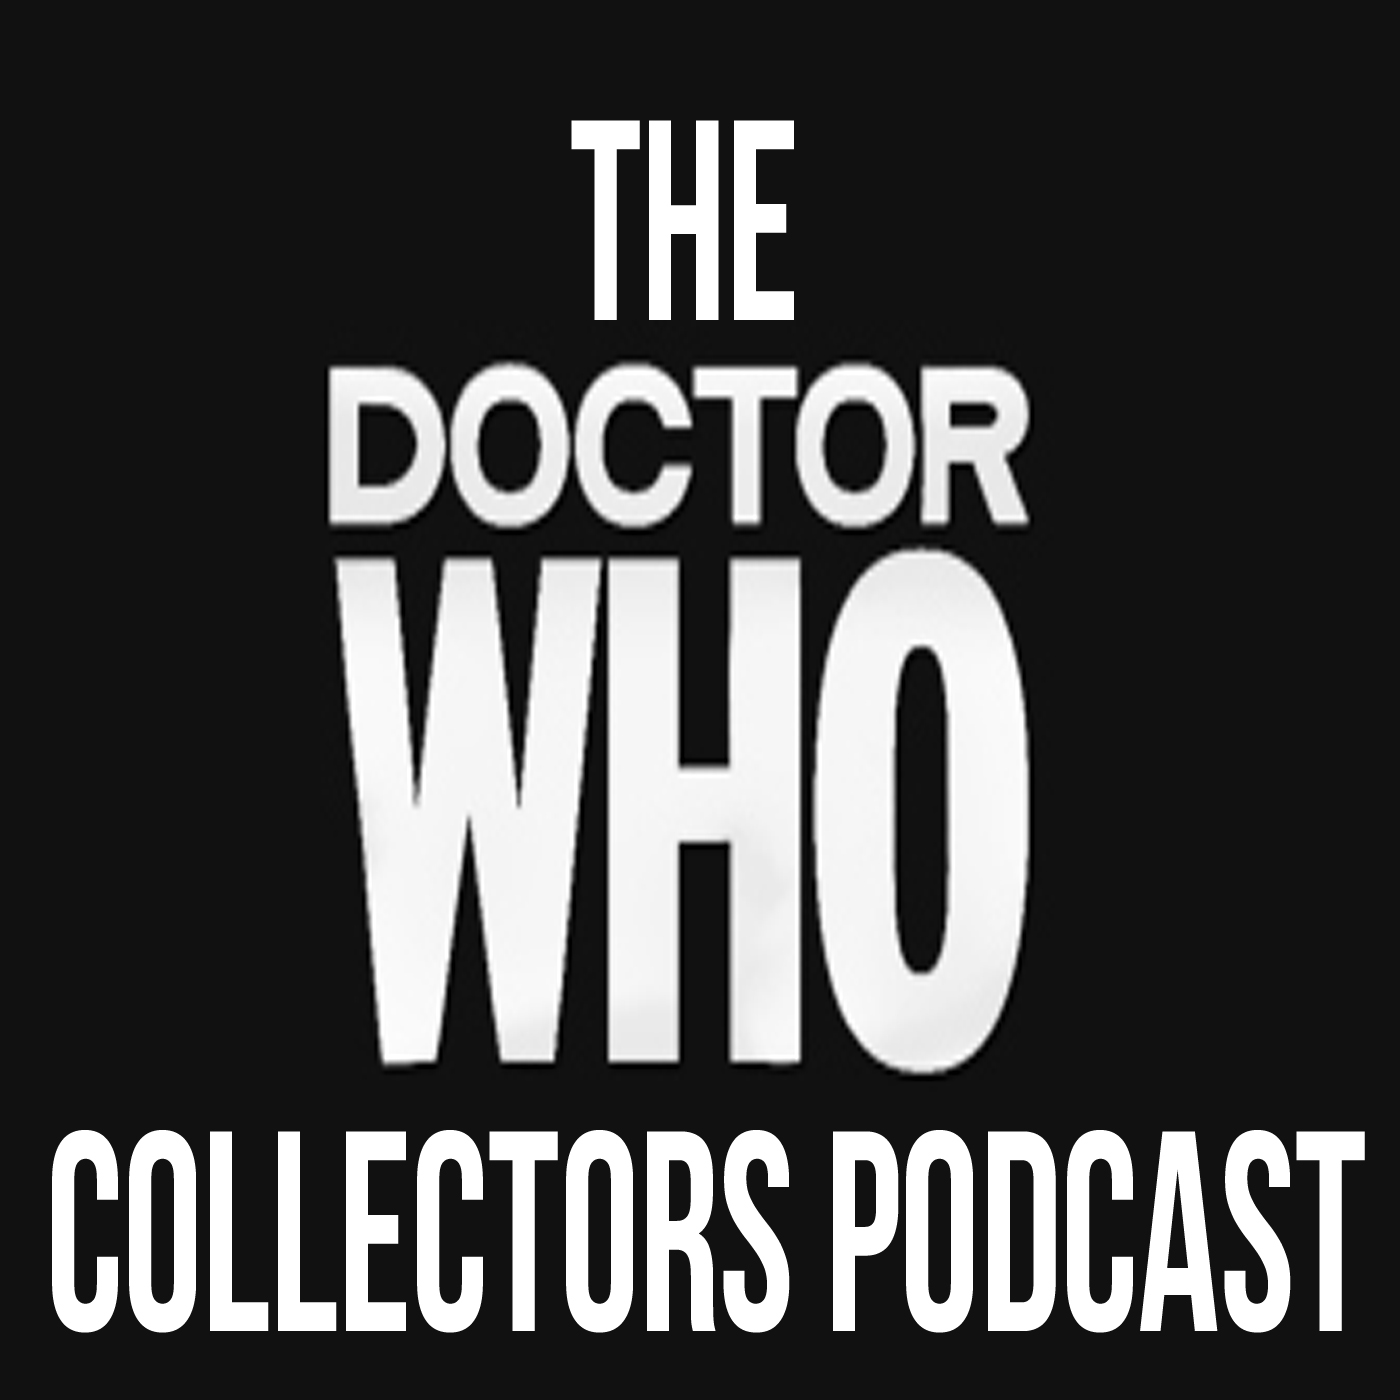 Thumbnail for Episode 3 – Dr. Who and Daleks (books) with a Dalek surprise ending